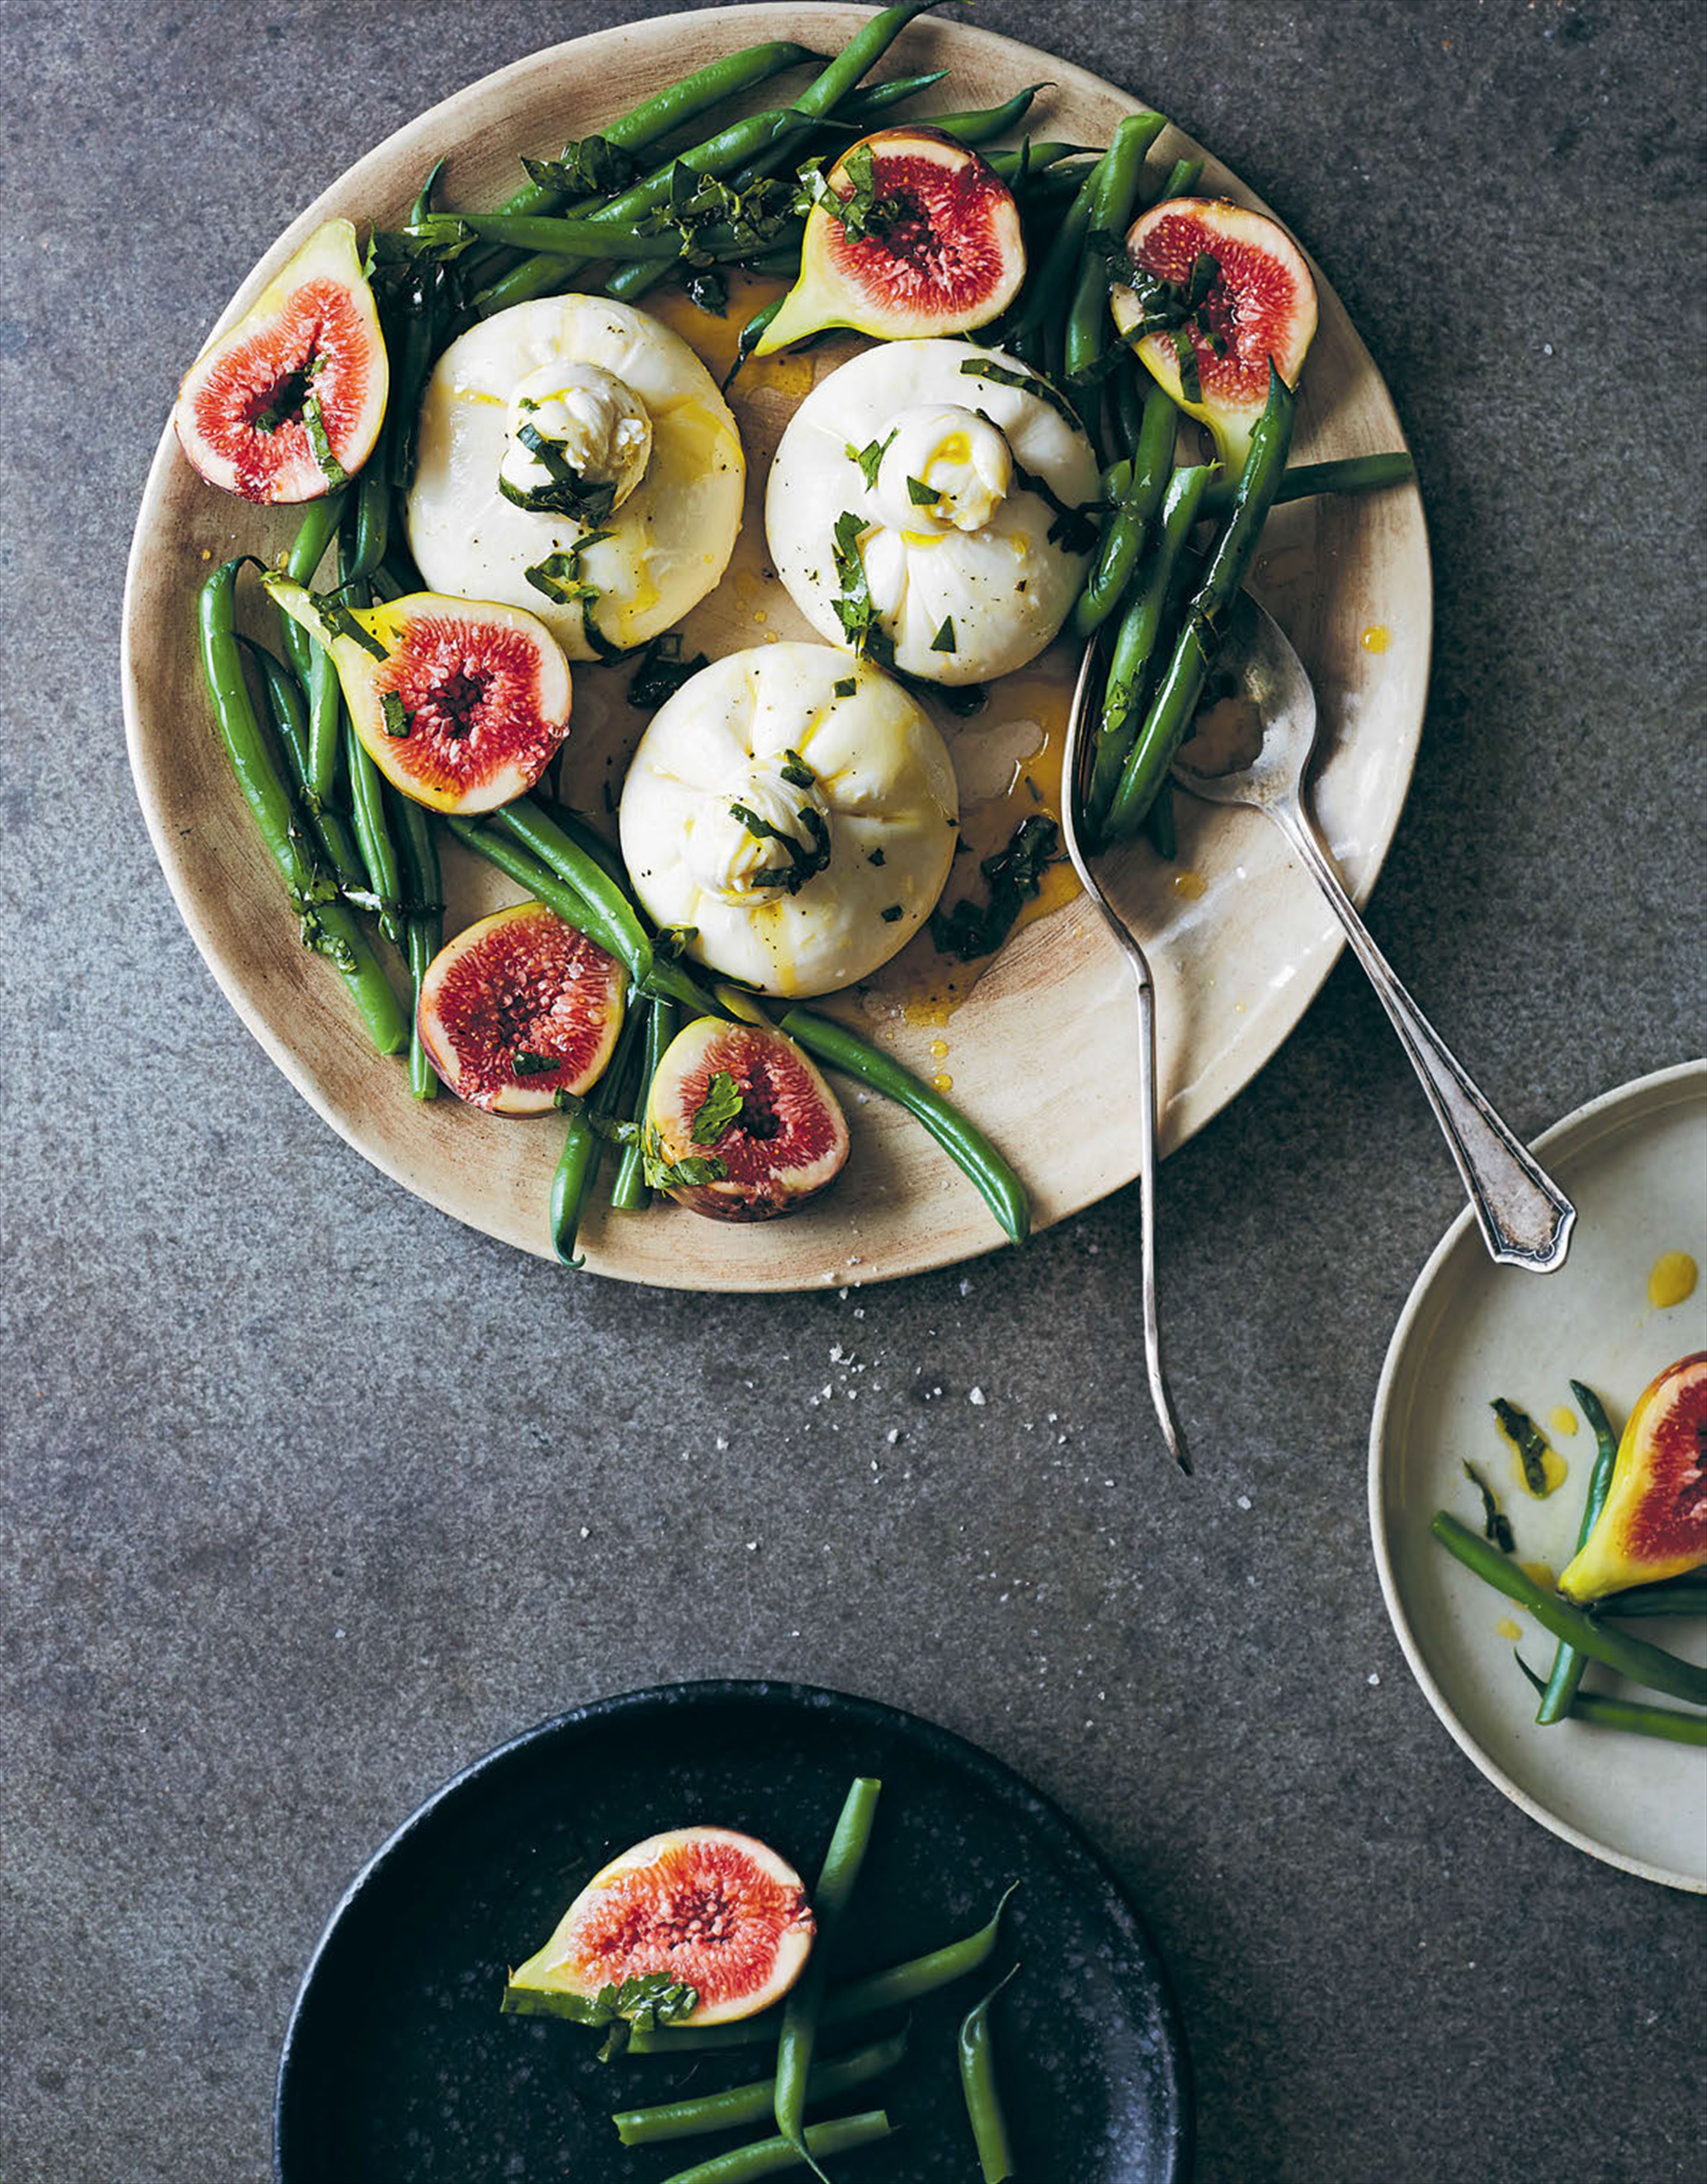 Burrata with green beans